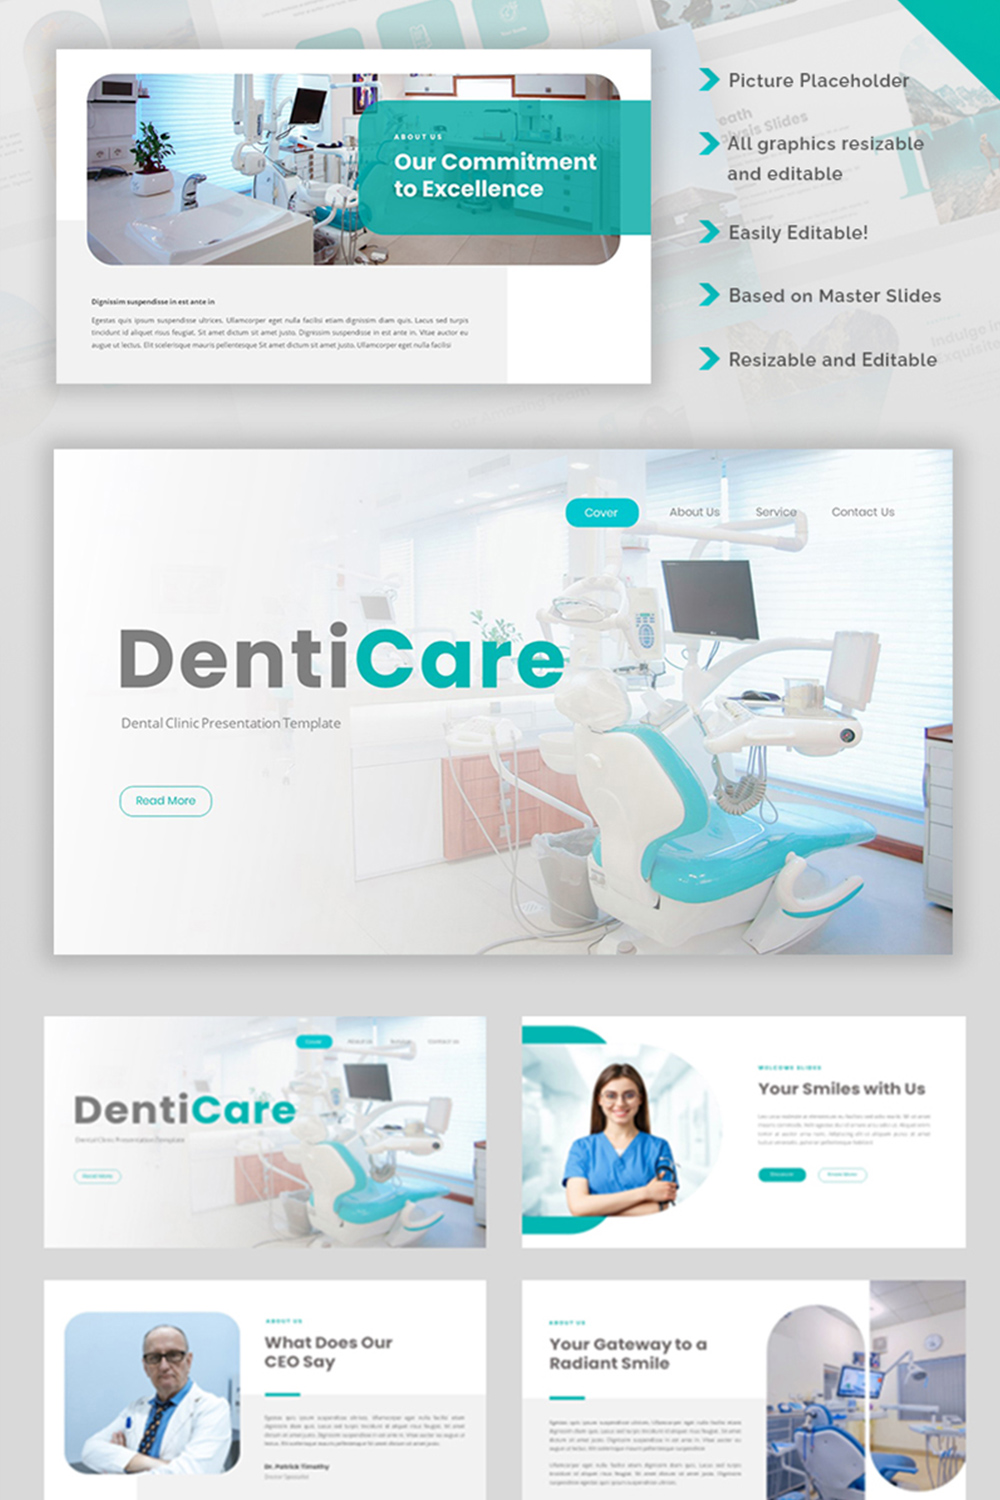 DentiCare-Dental Clinic PowerPoint Template pinterest preview image.